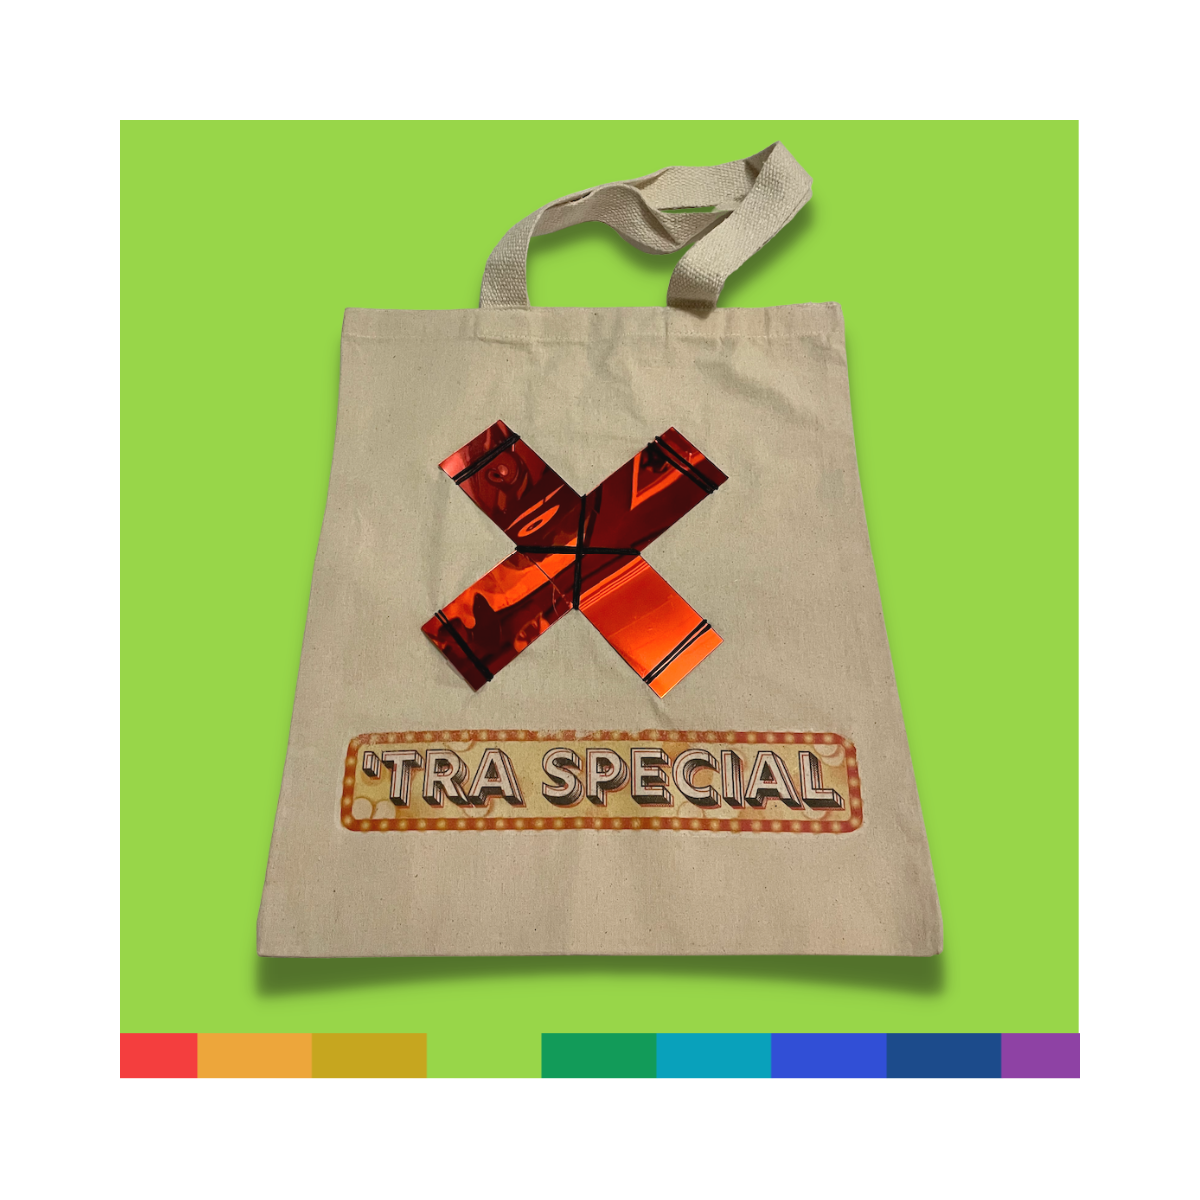 X'tra Special - Light-up Beige Canvas Tote Bag